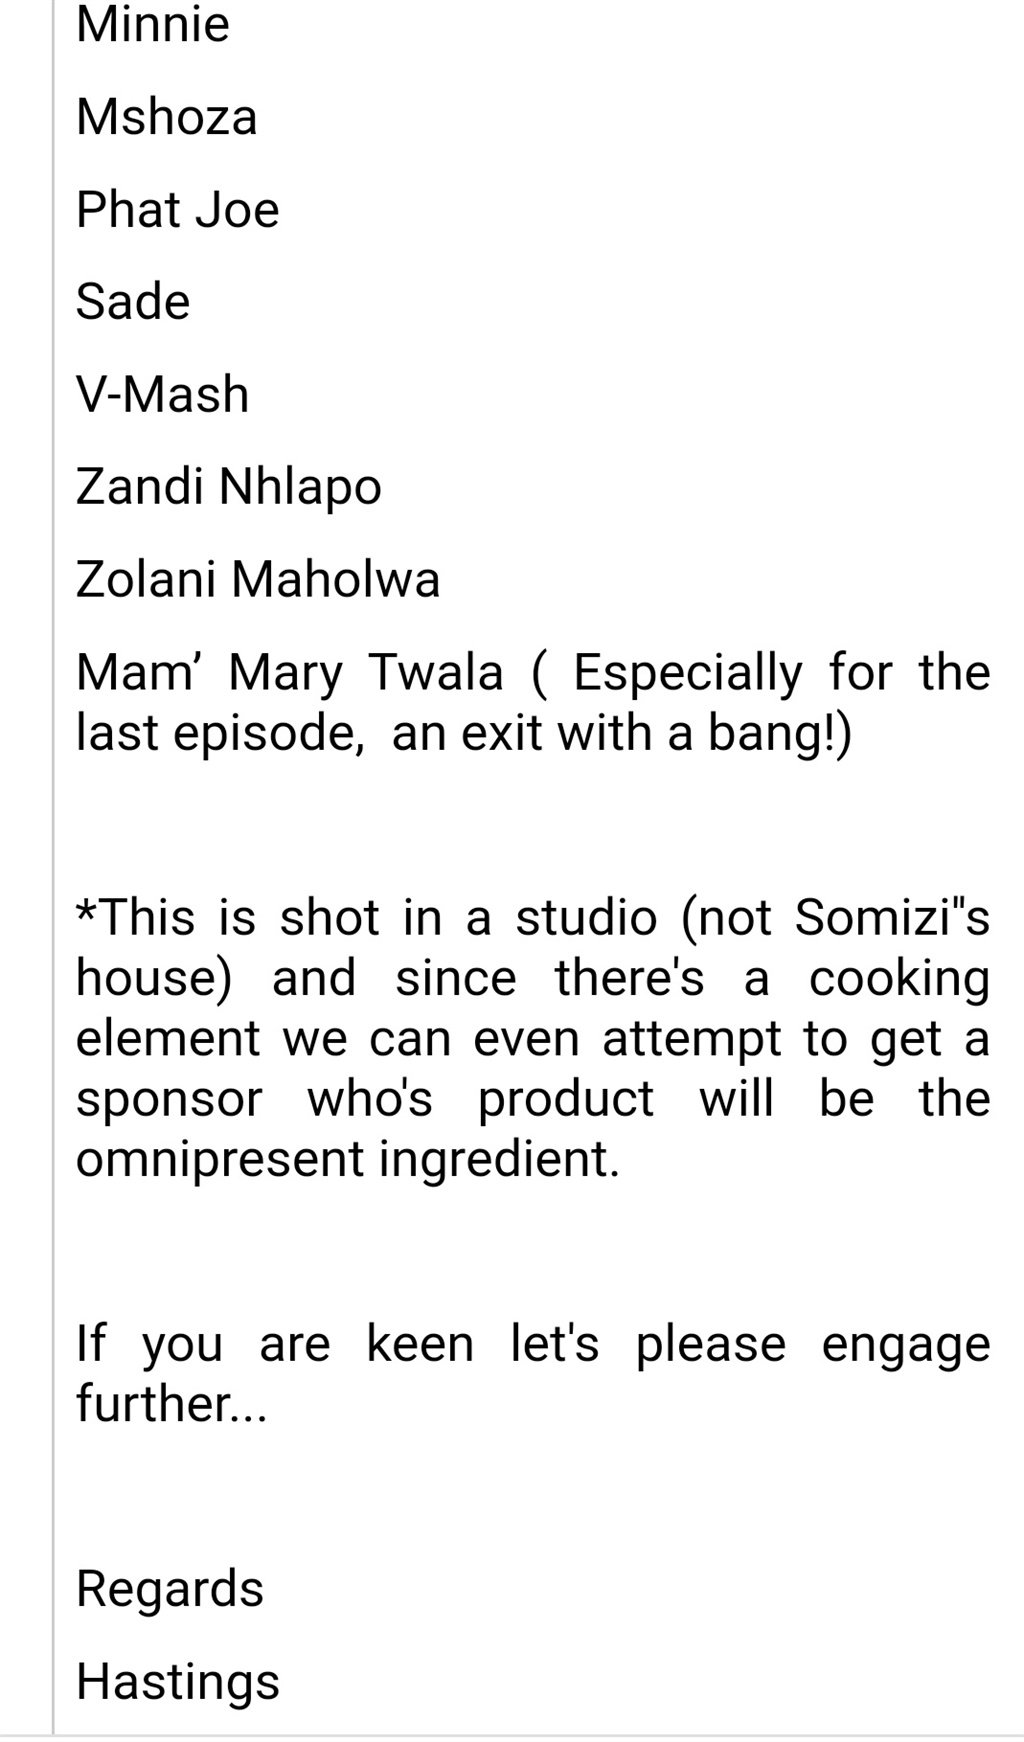 An email from Hastings Moeng where he proposed the